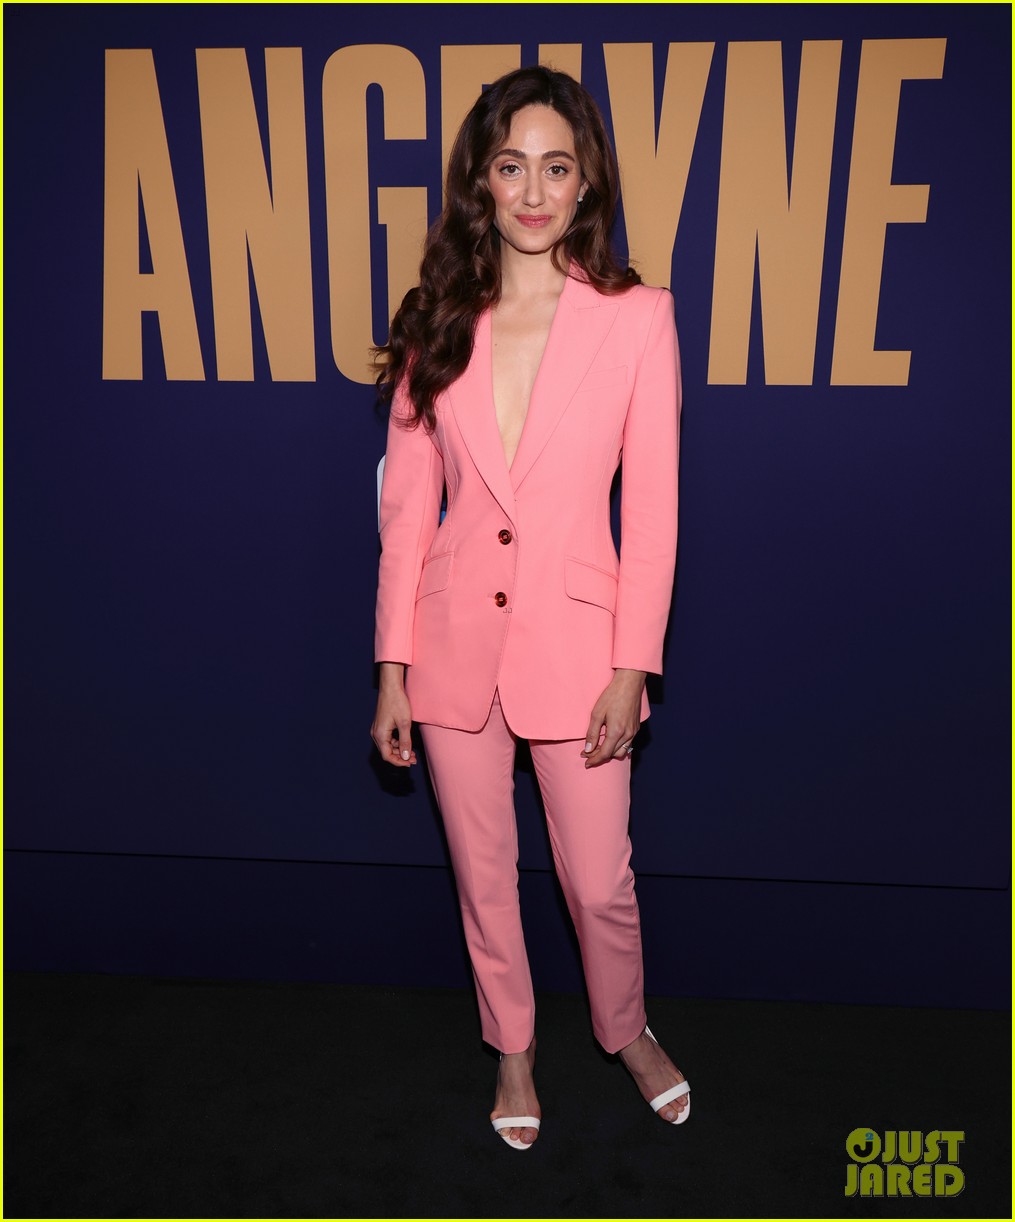 emmy rossum goes pretty in pink suit angelyne fyc event 01